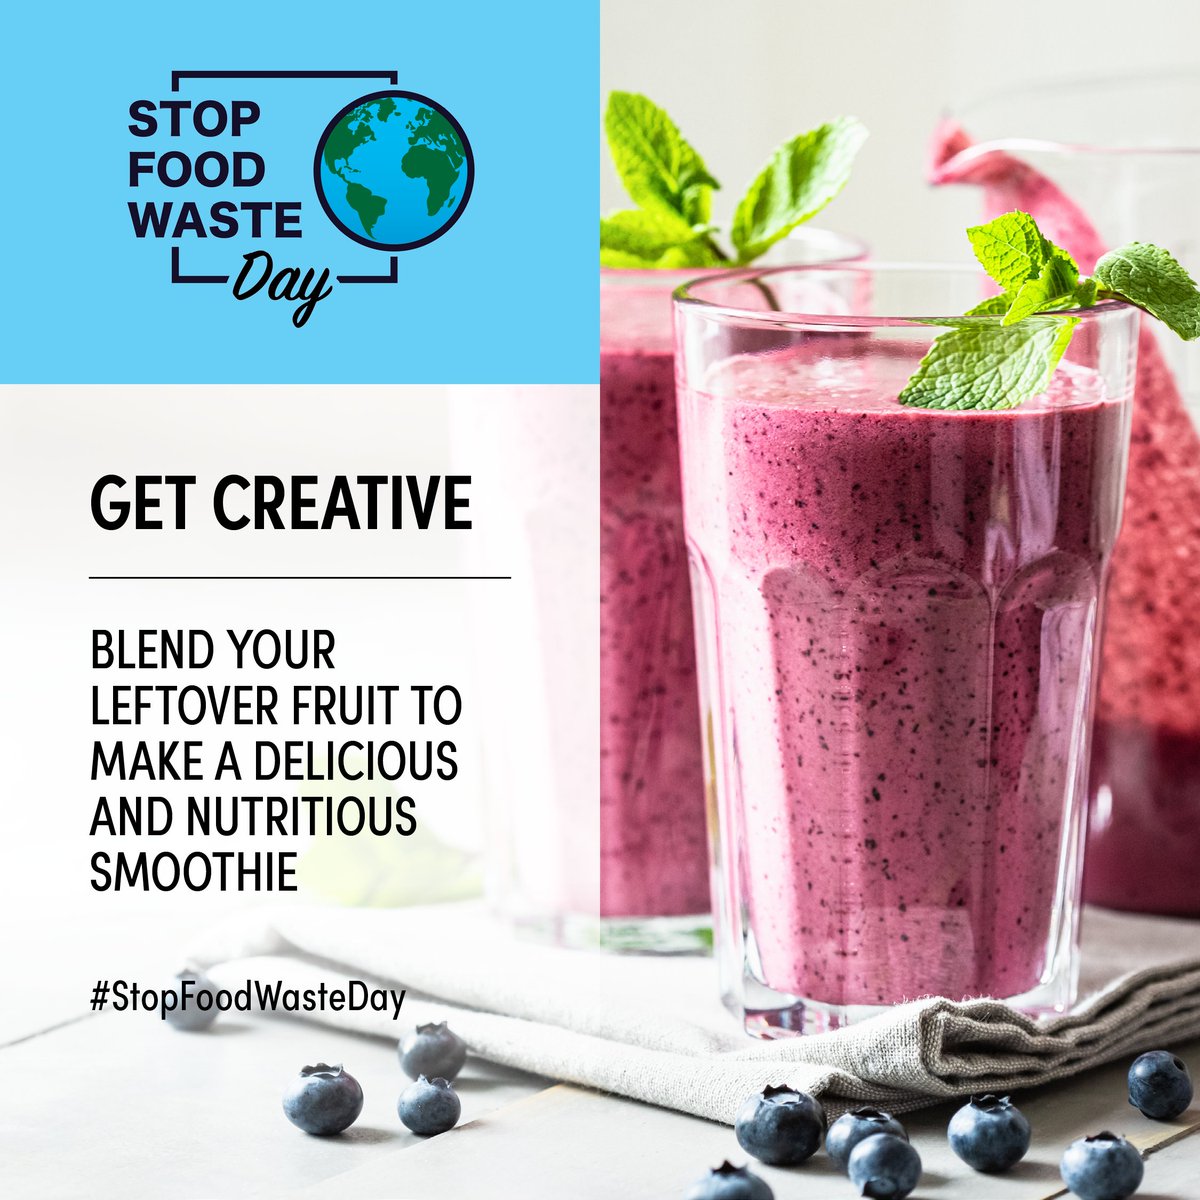 #StopFoodWaste Tips: get creative 

• Experiment with what you have in the fridge 
• Try making bubble and squeak or colourful frittatas from leftovers 
• Use odd bits of vegetables to make wholesome soups